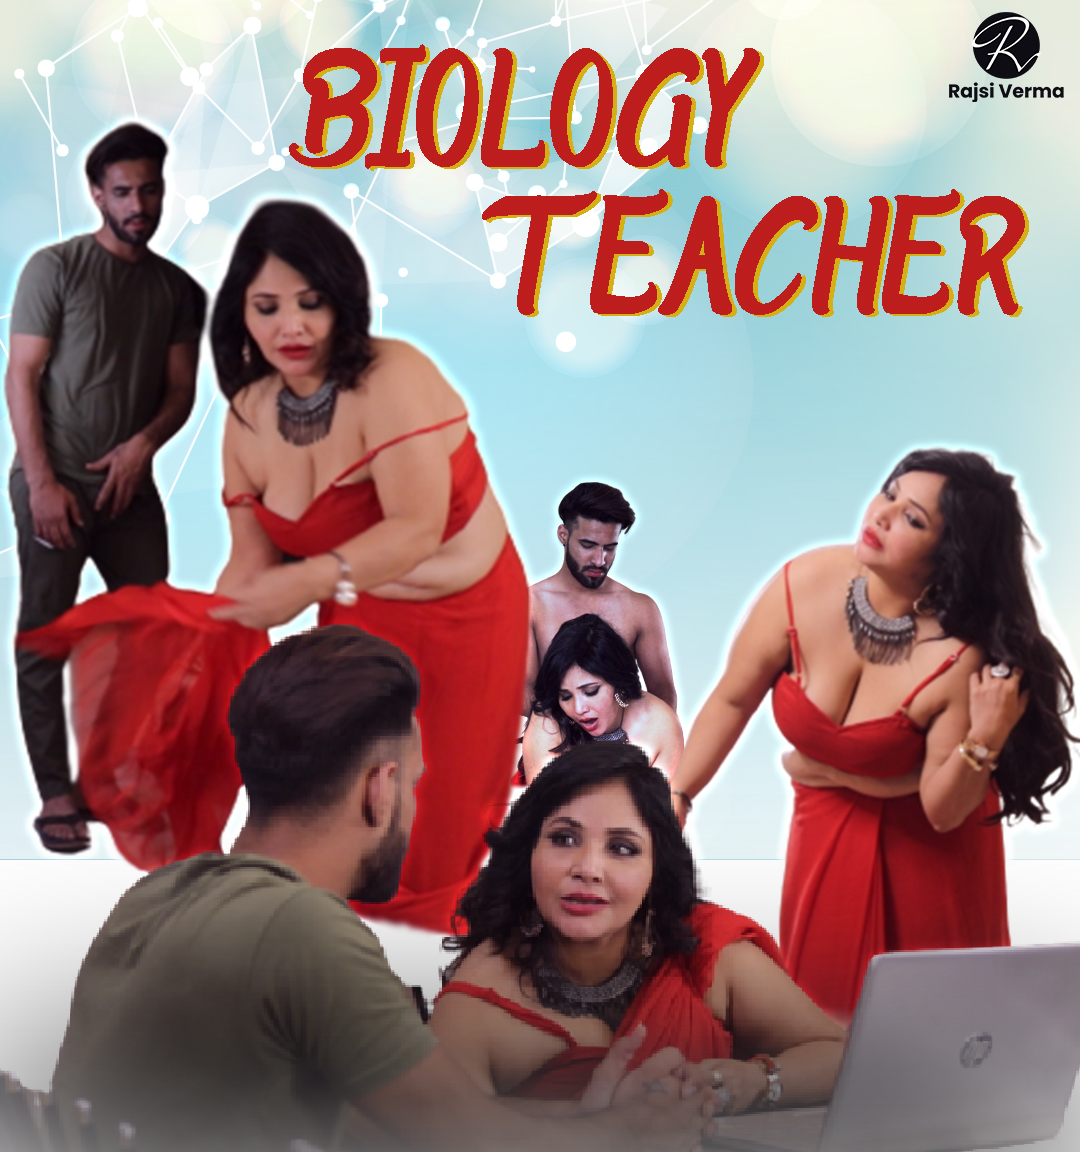 You are currently viewing Biology Teacher 2021 Rajsi Verma App Hindi Hot Short Film 720p HDRip 150MB Download & Watch Online